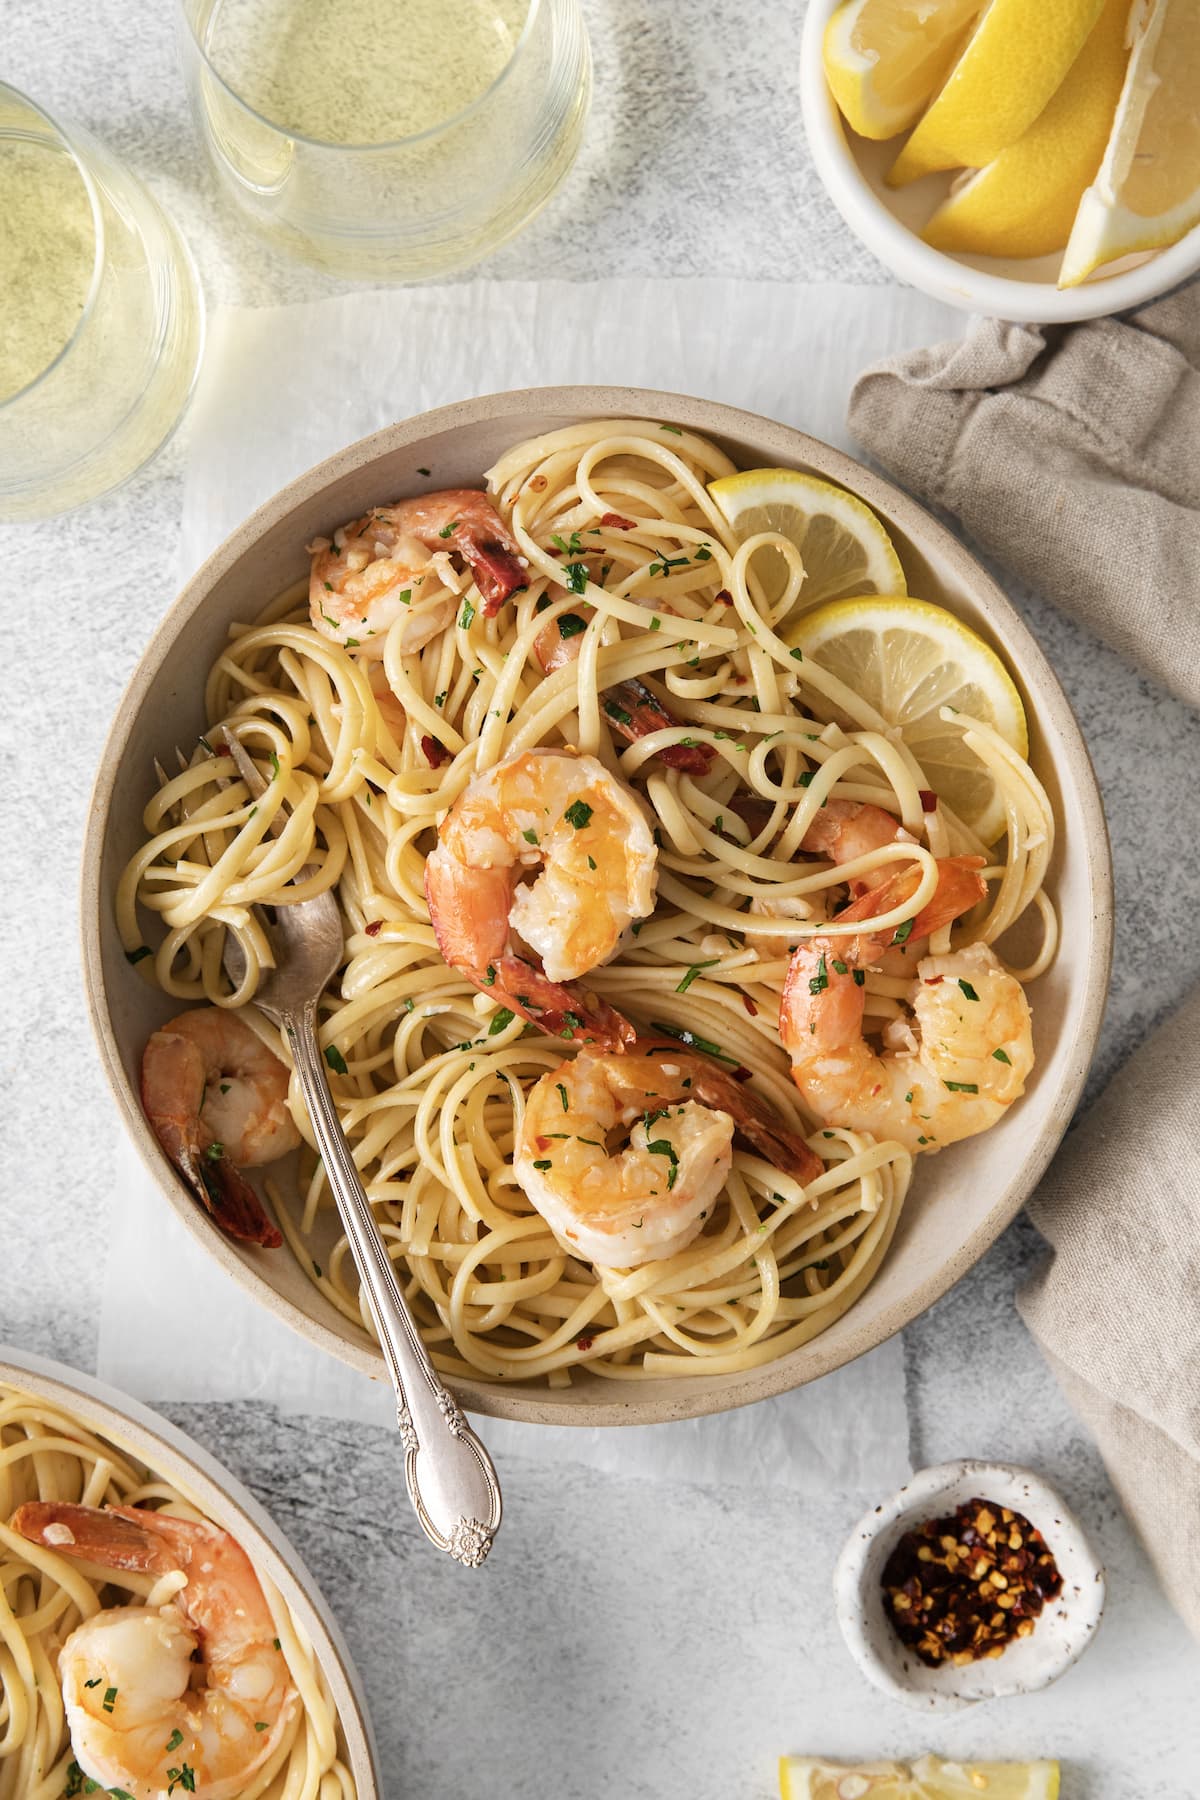 An easy shrimp scampi with lemon-infused pasta.